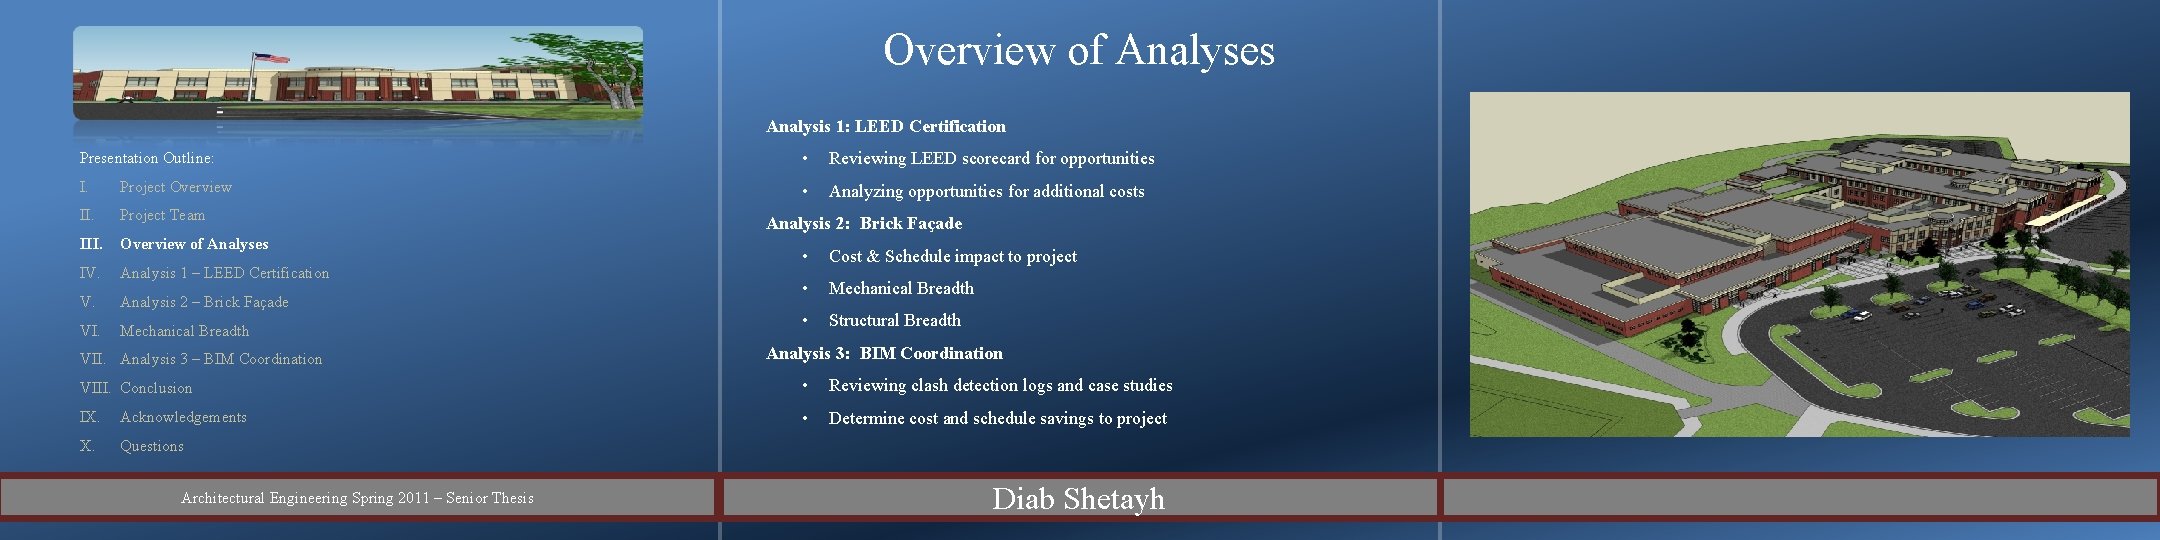 Overview of Analyses Analysis 1: LEED Certification Presentation Outline: • Reviewing LEED scorecard for